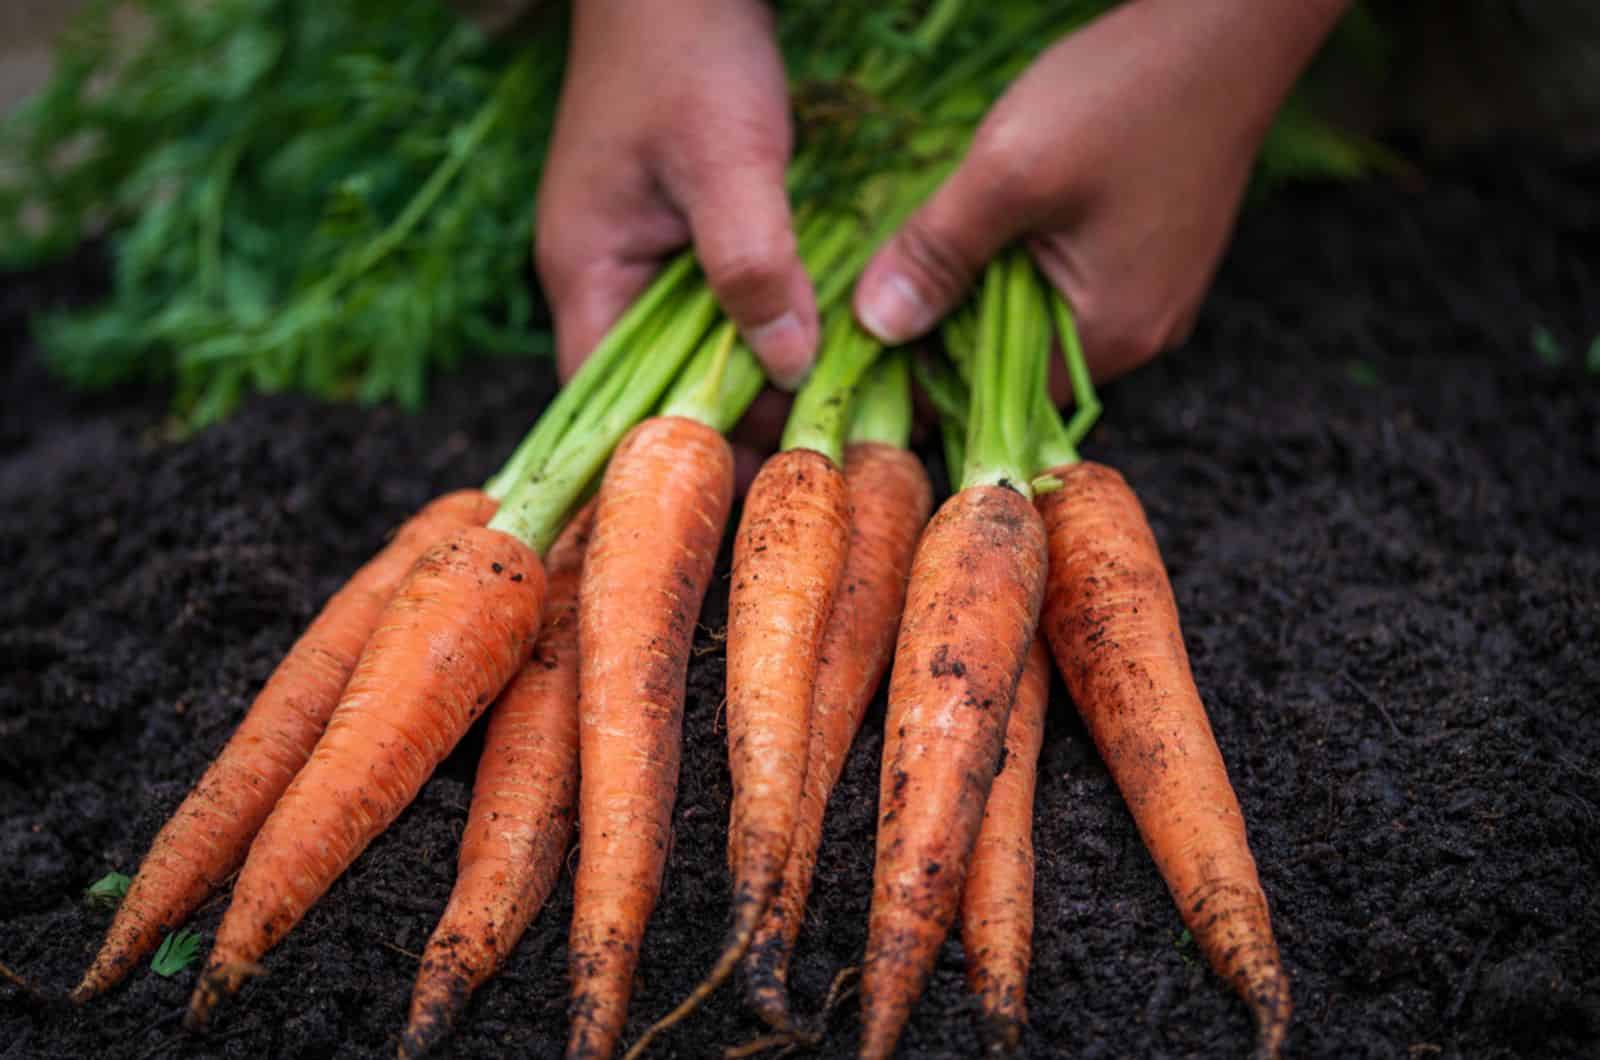 woman farmer hands working on a bunches of carrots in a farm